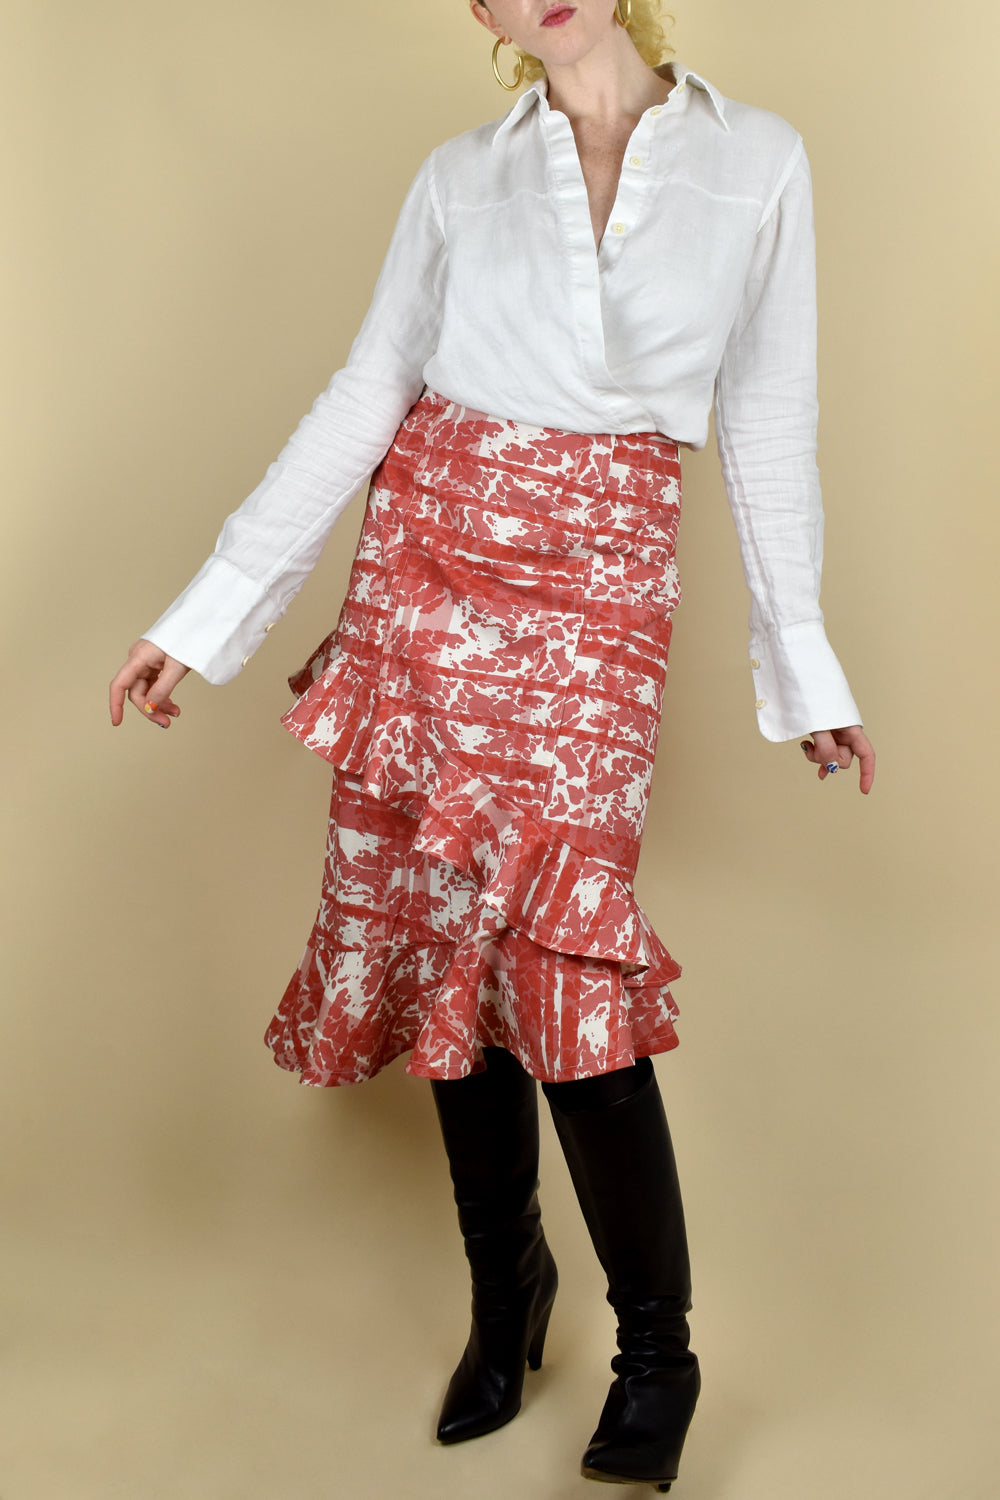 Gone Rogue Skirt sewing pattern by Forest and Thread